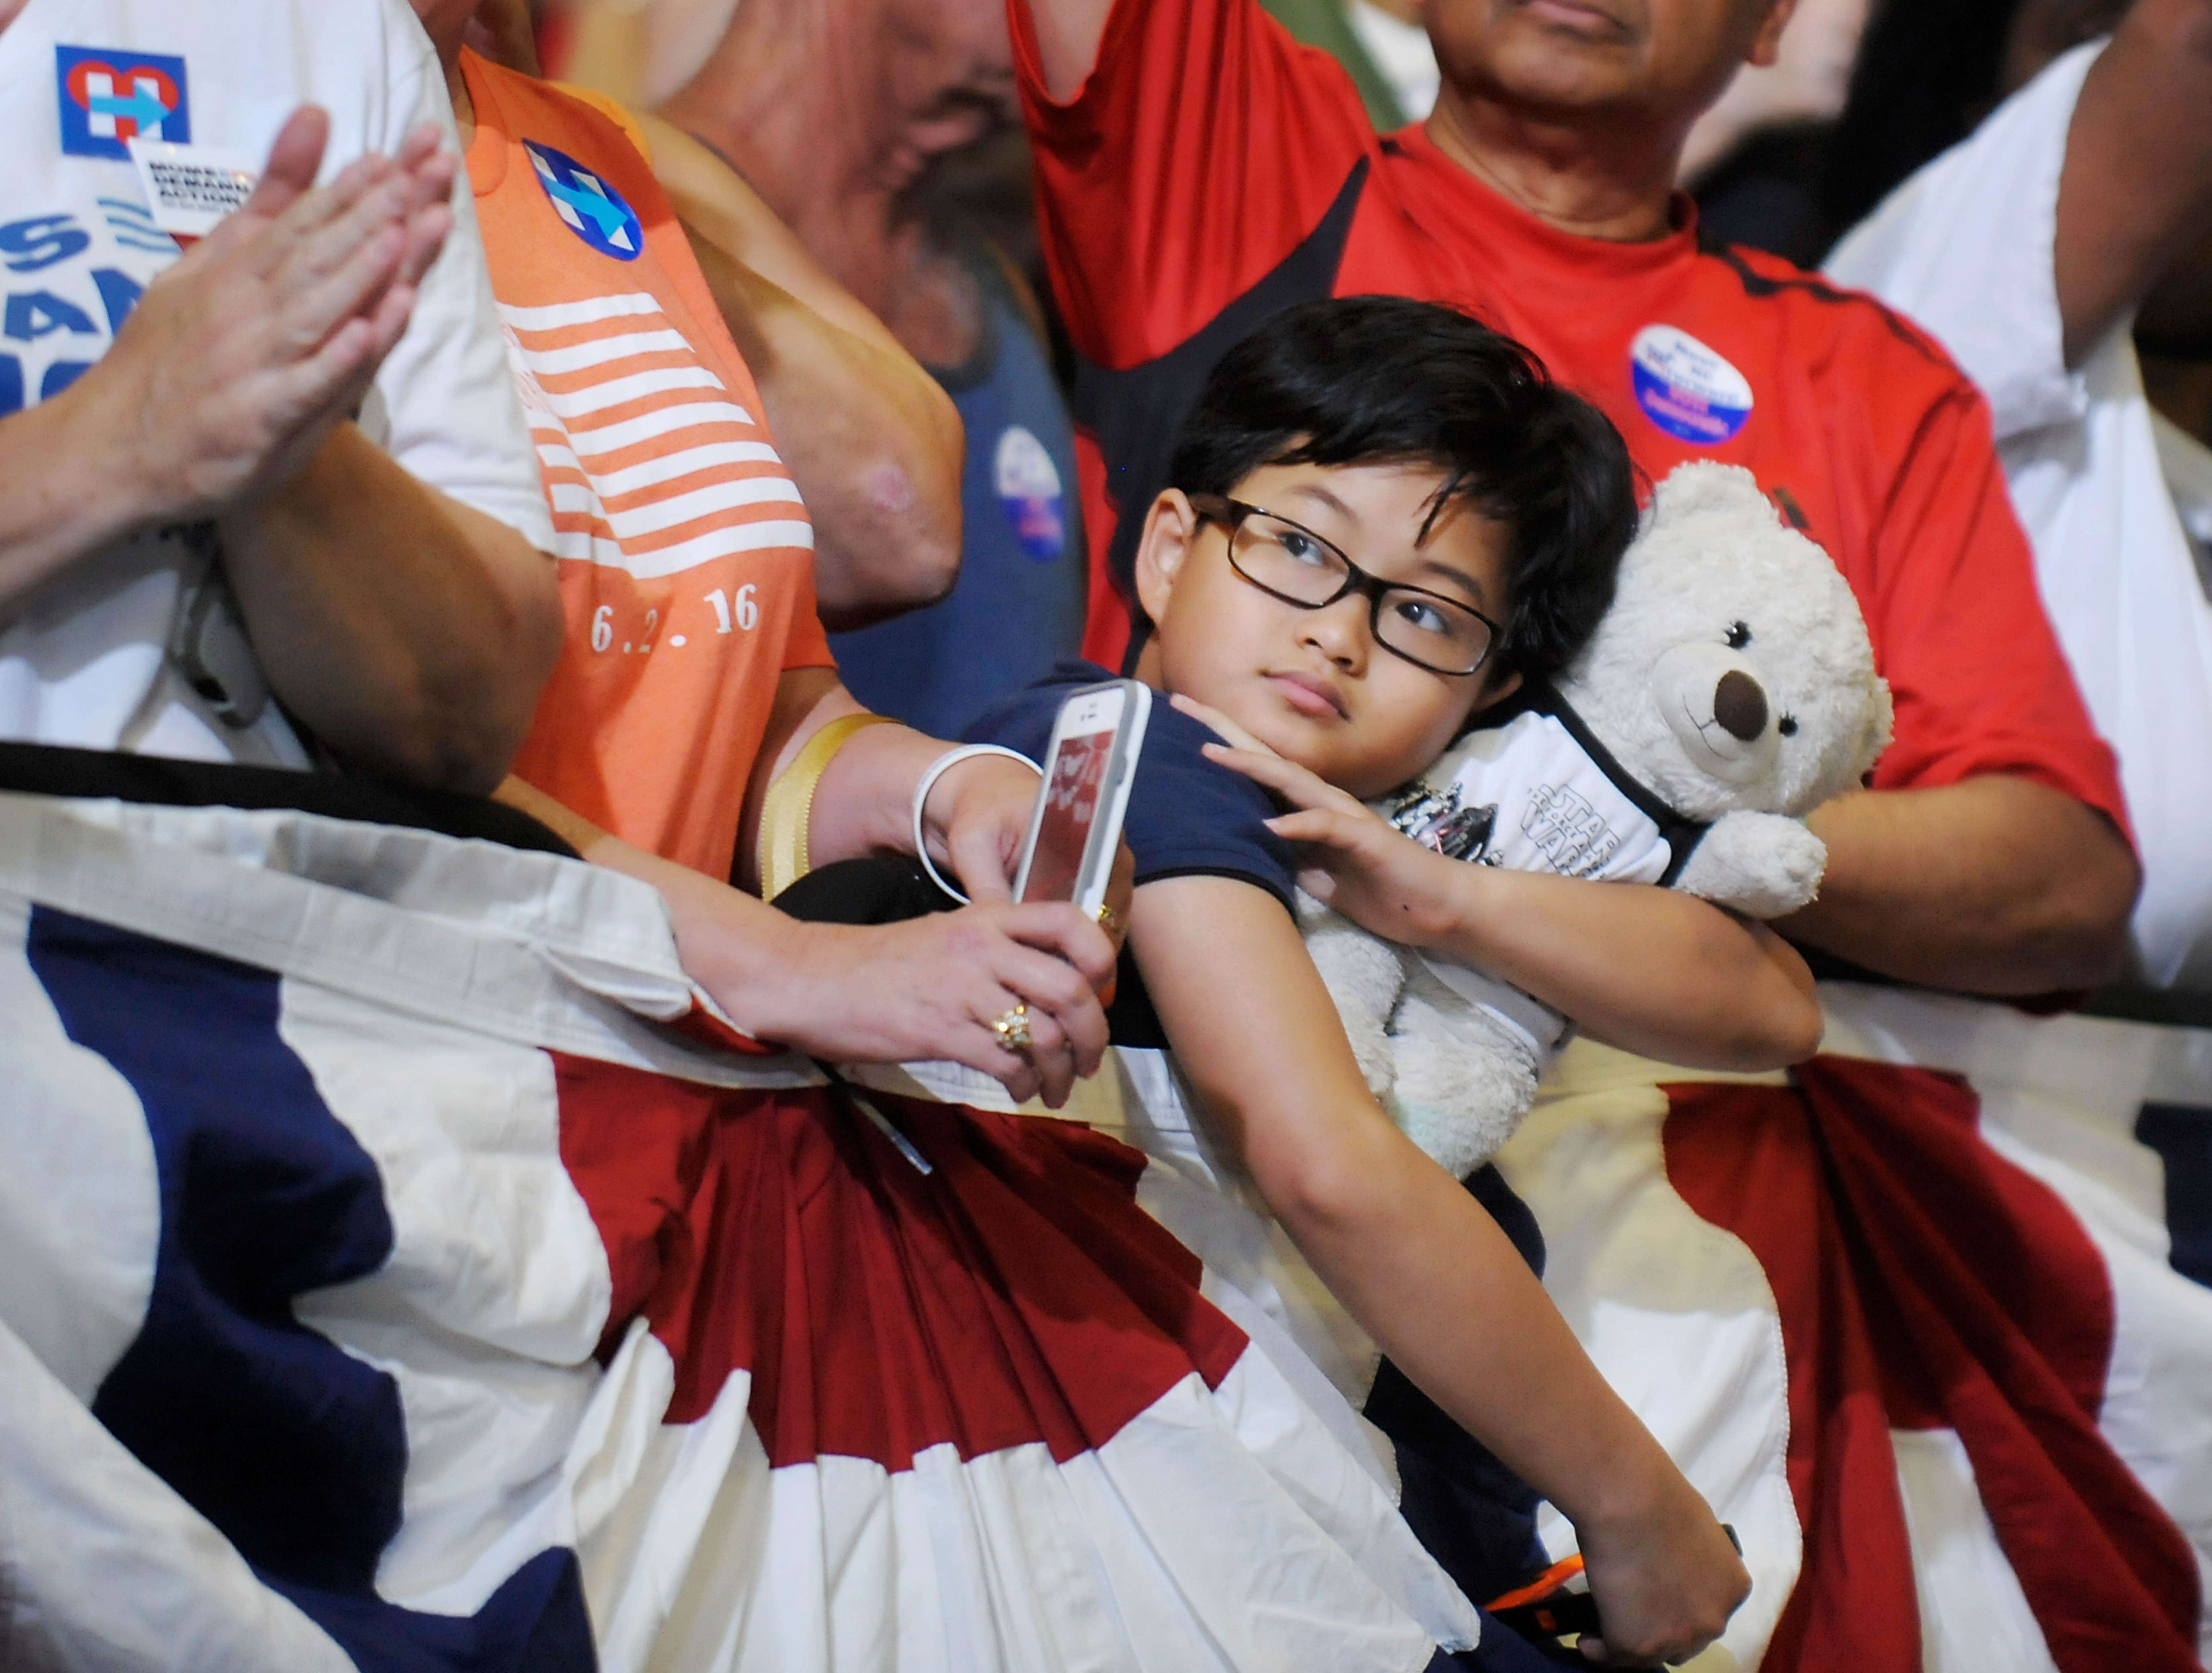 A young supporter awaits the arrival of presumptive Democratic presidential nominee Hillary Clinton at an event in Raleigh, North Carolina. Only 57.5 per cent of the 218 million Americans eligible to vote actually cast their ballot in the 2012 presidential election. Photo: AFP